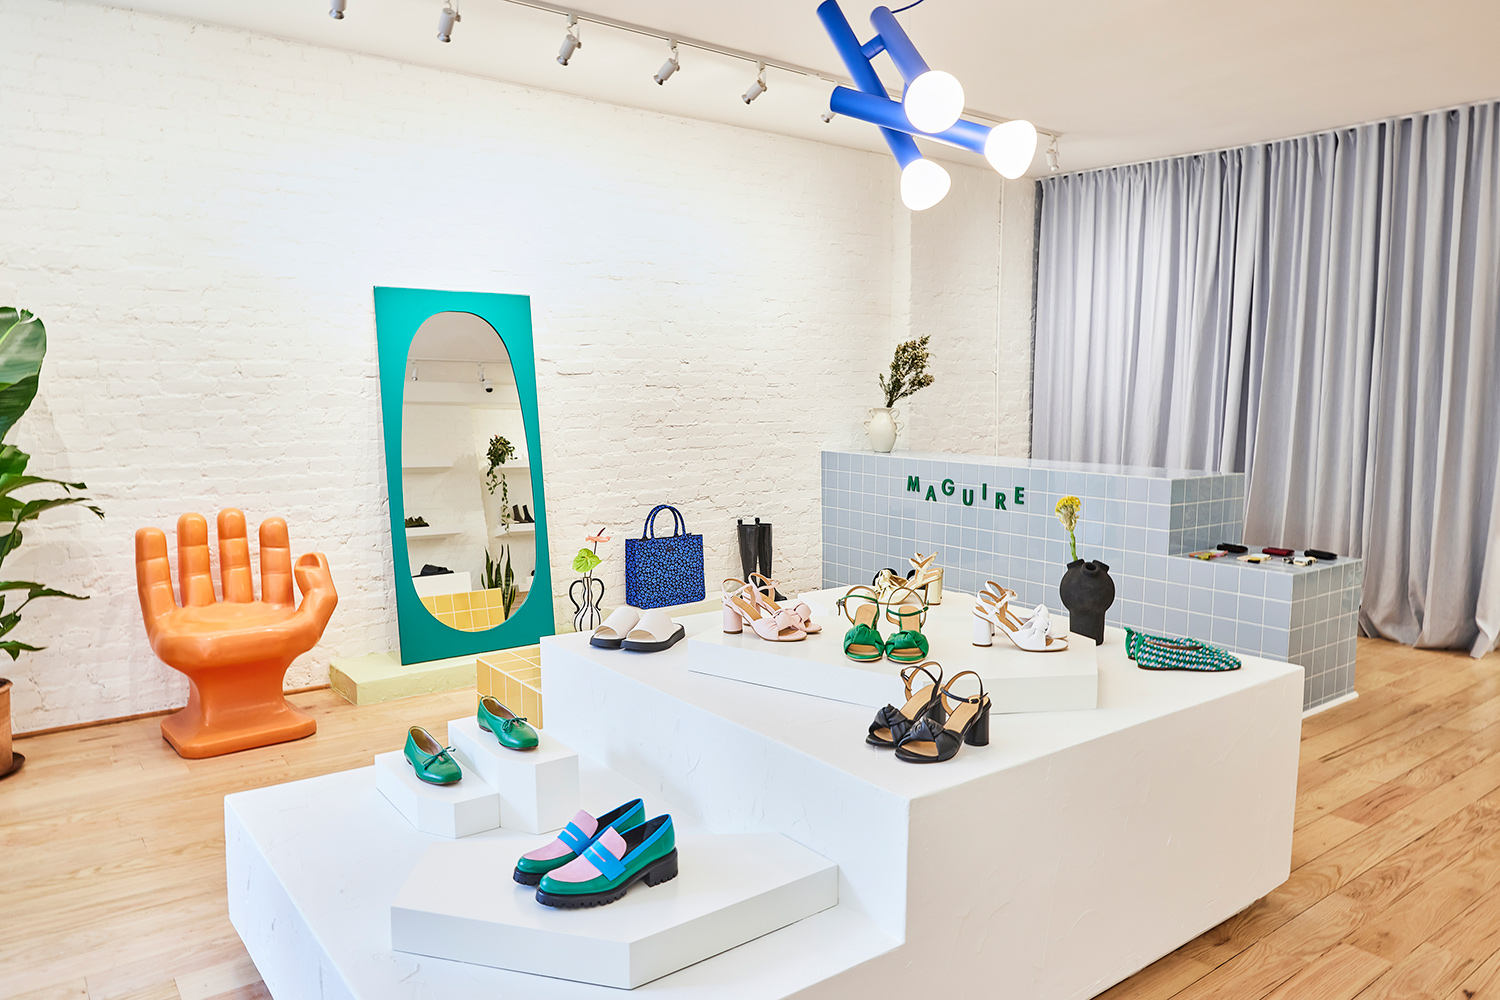 Inside a Maguire shoe store in NYC